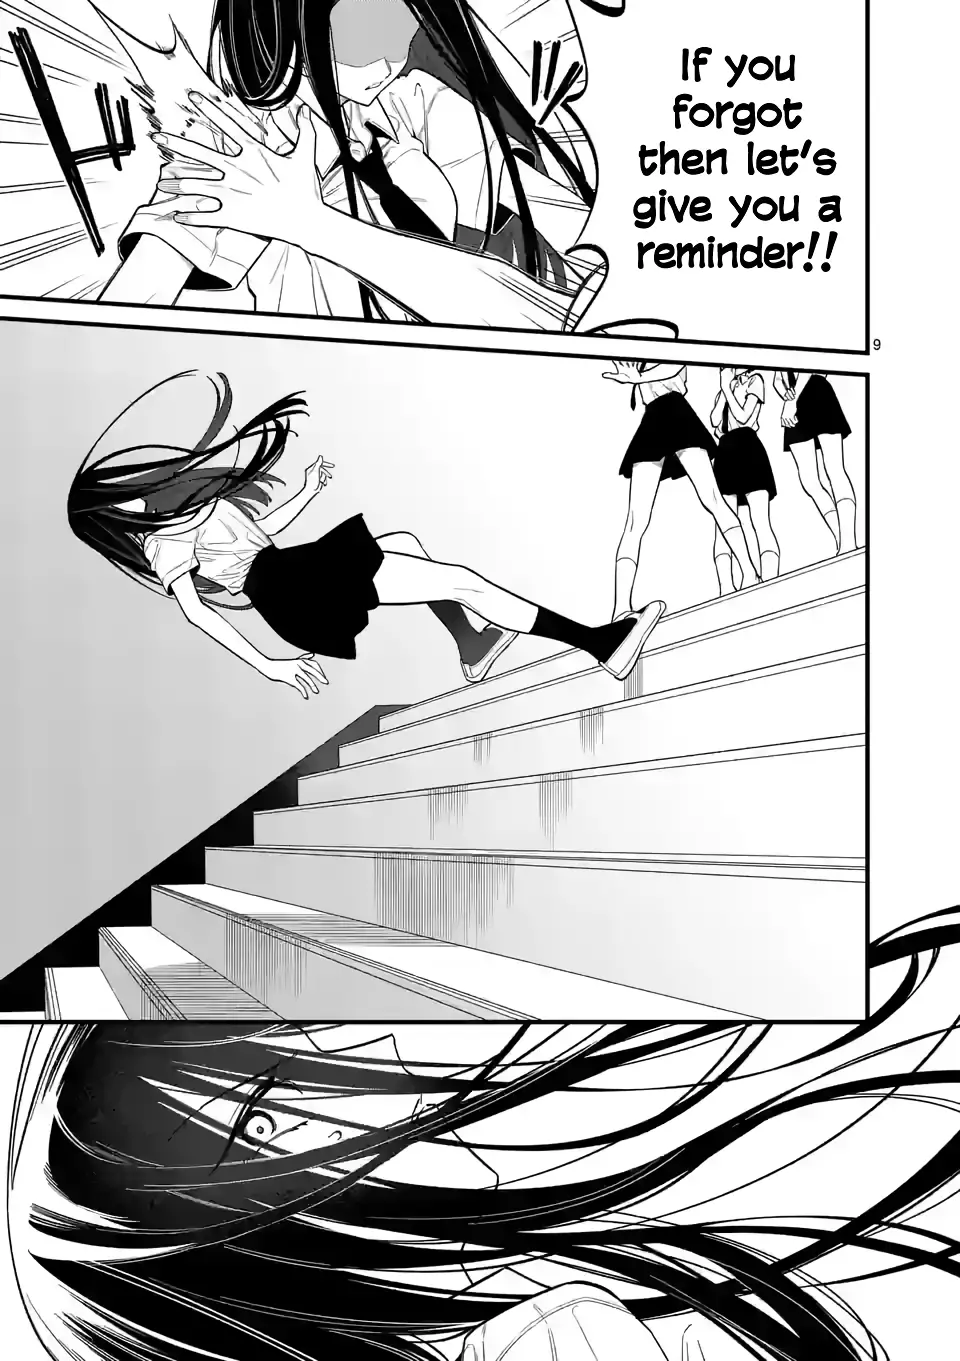 Liar Satsuki Can See Death - 59 page 9-9a0c1f71